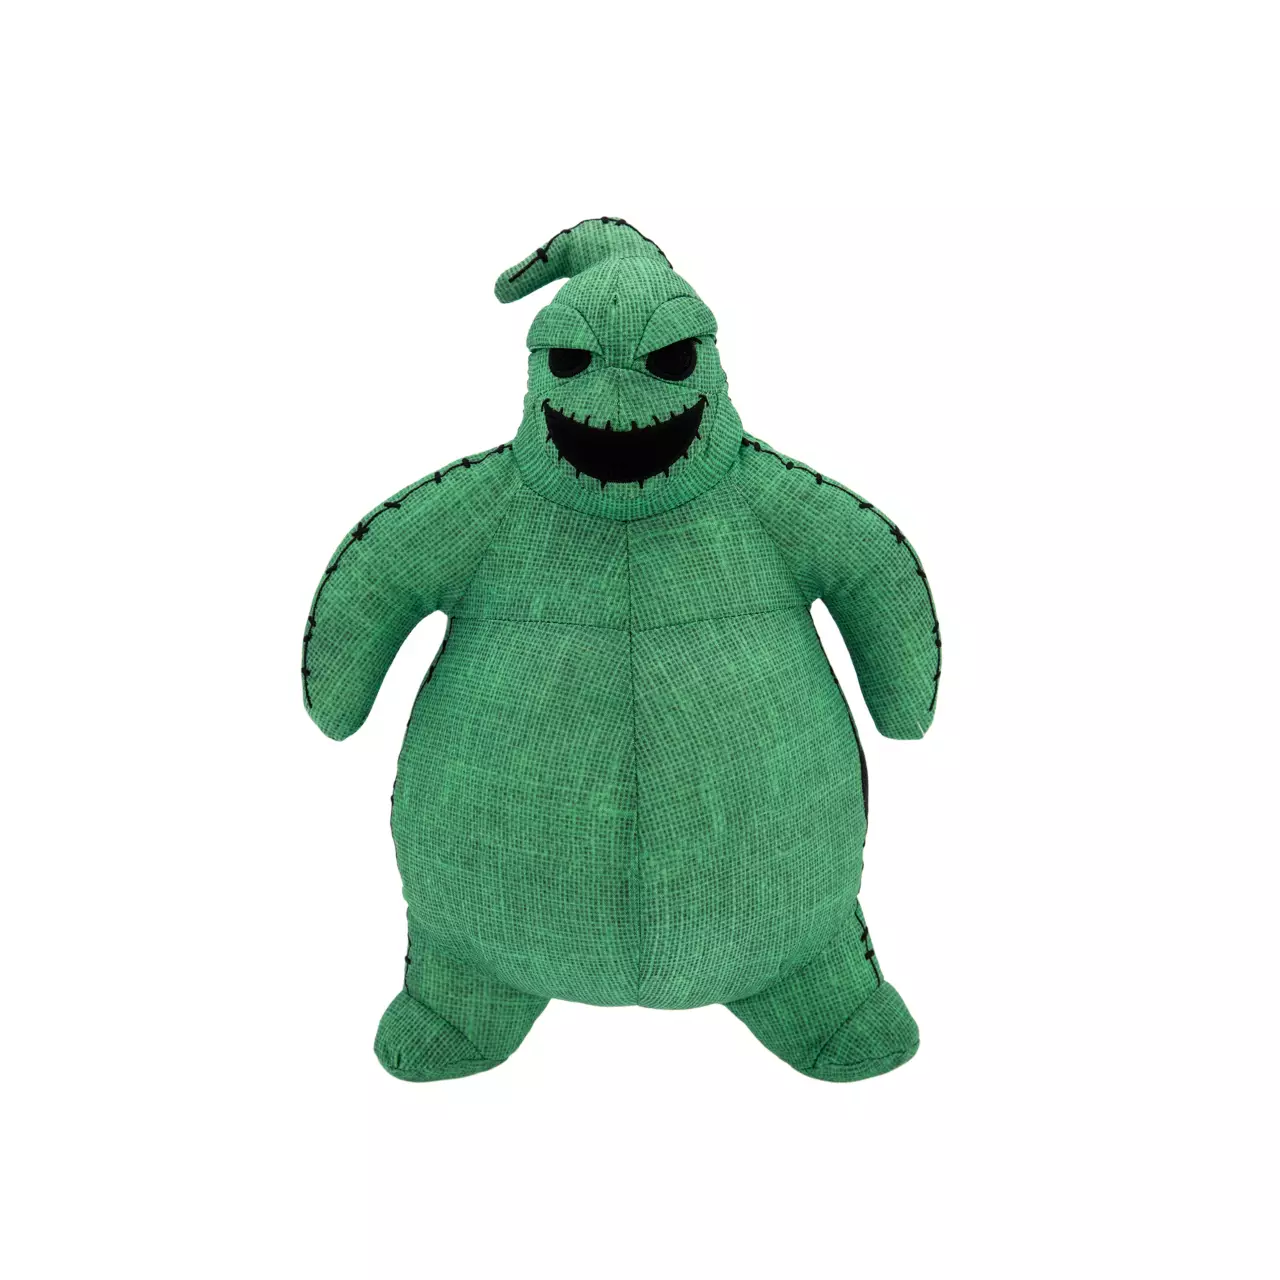 Oogie Boogie Plush – The Nightmare Before Christmas